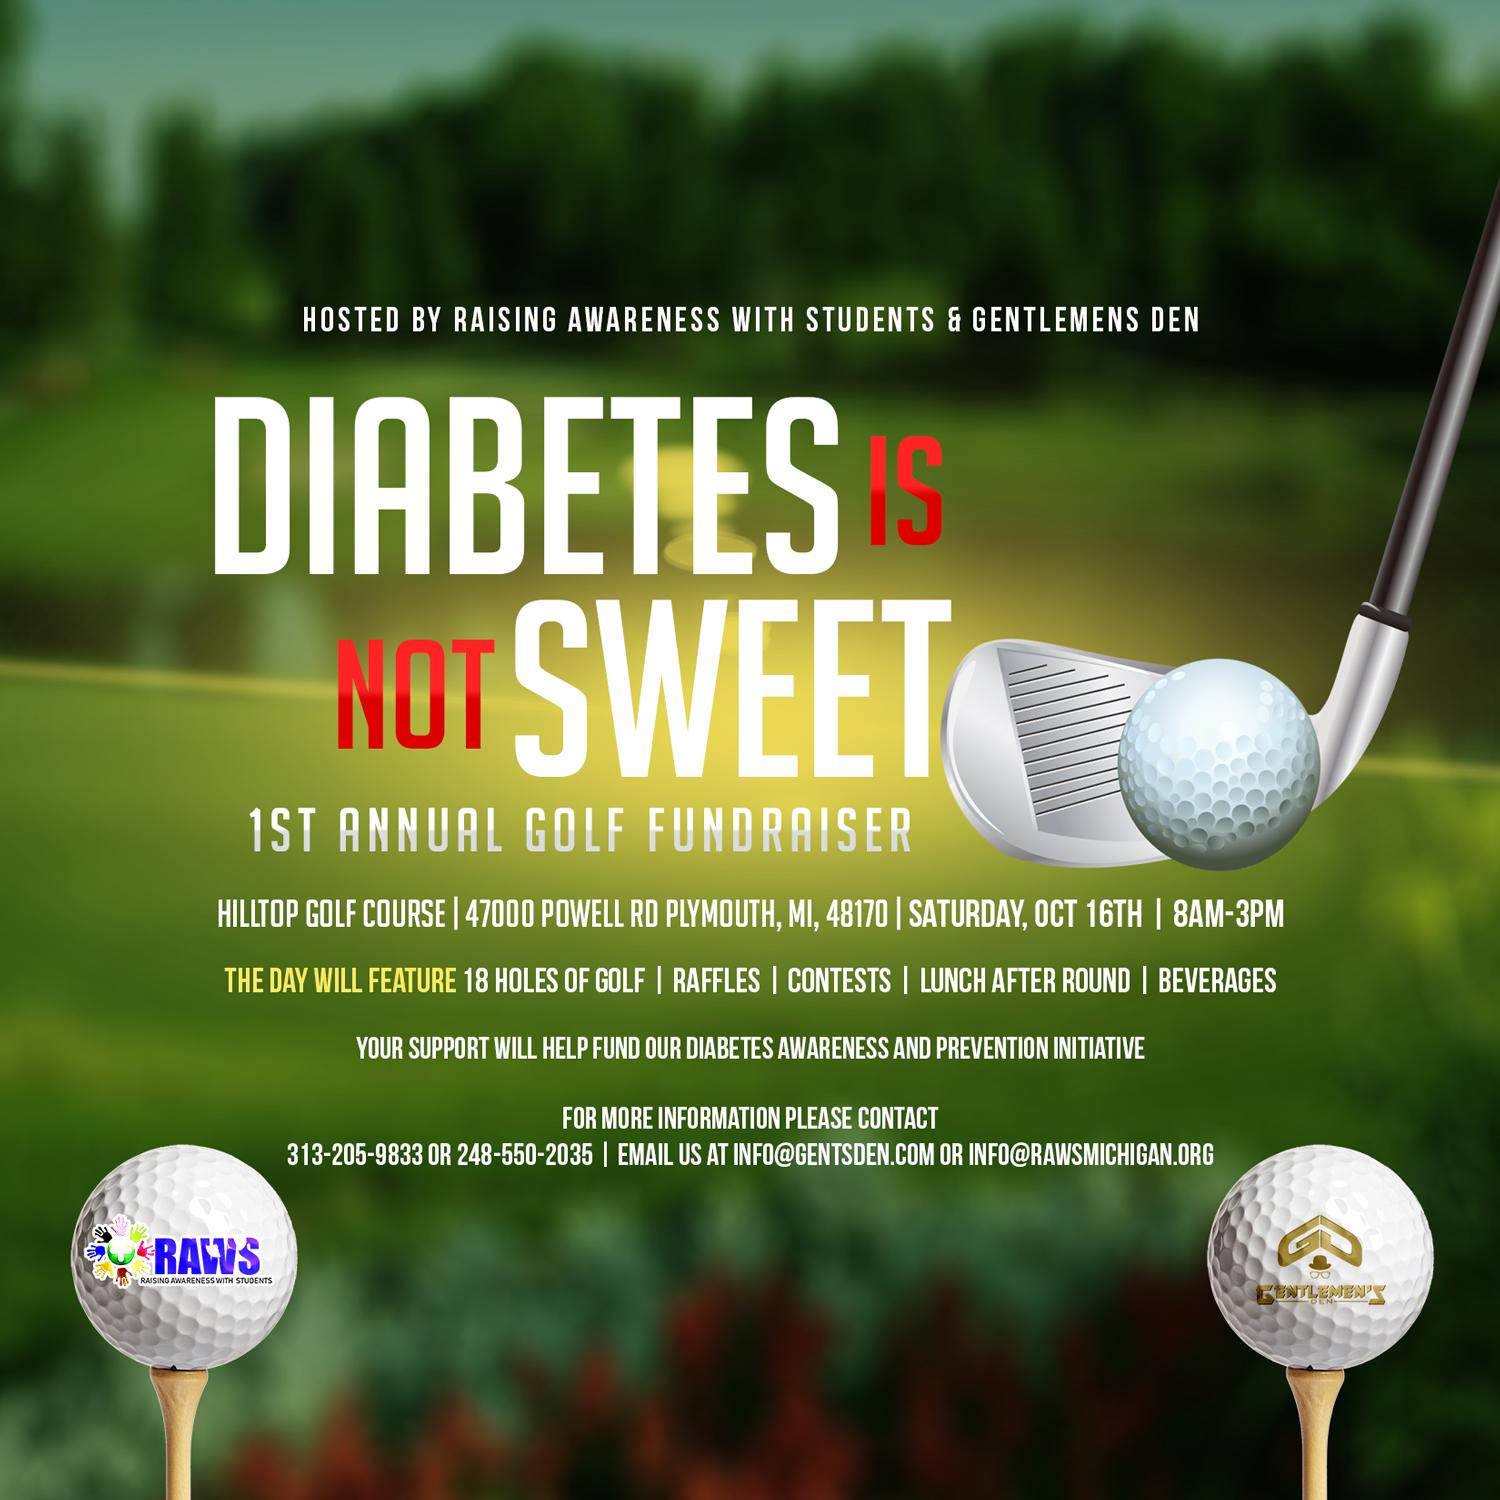 Diabetes is NOT Sweet: 1st Annual Golf Fundraiser